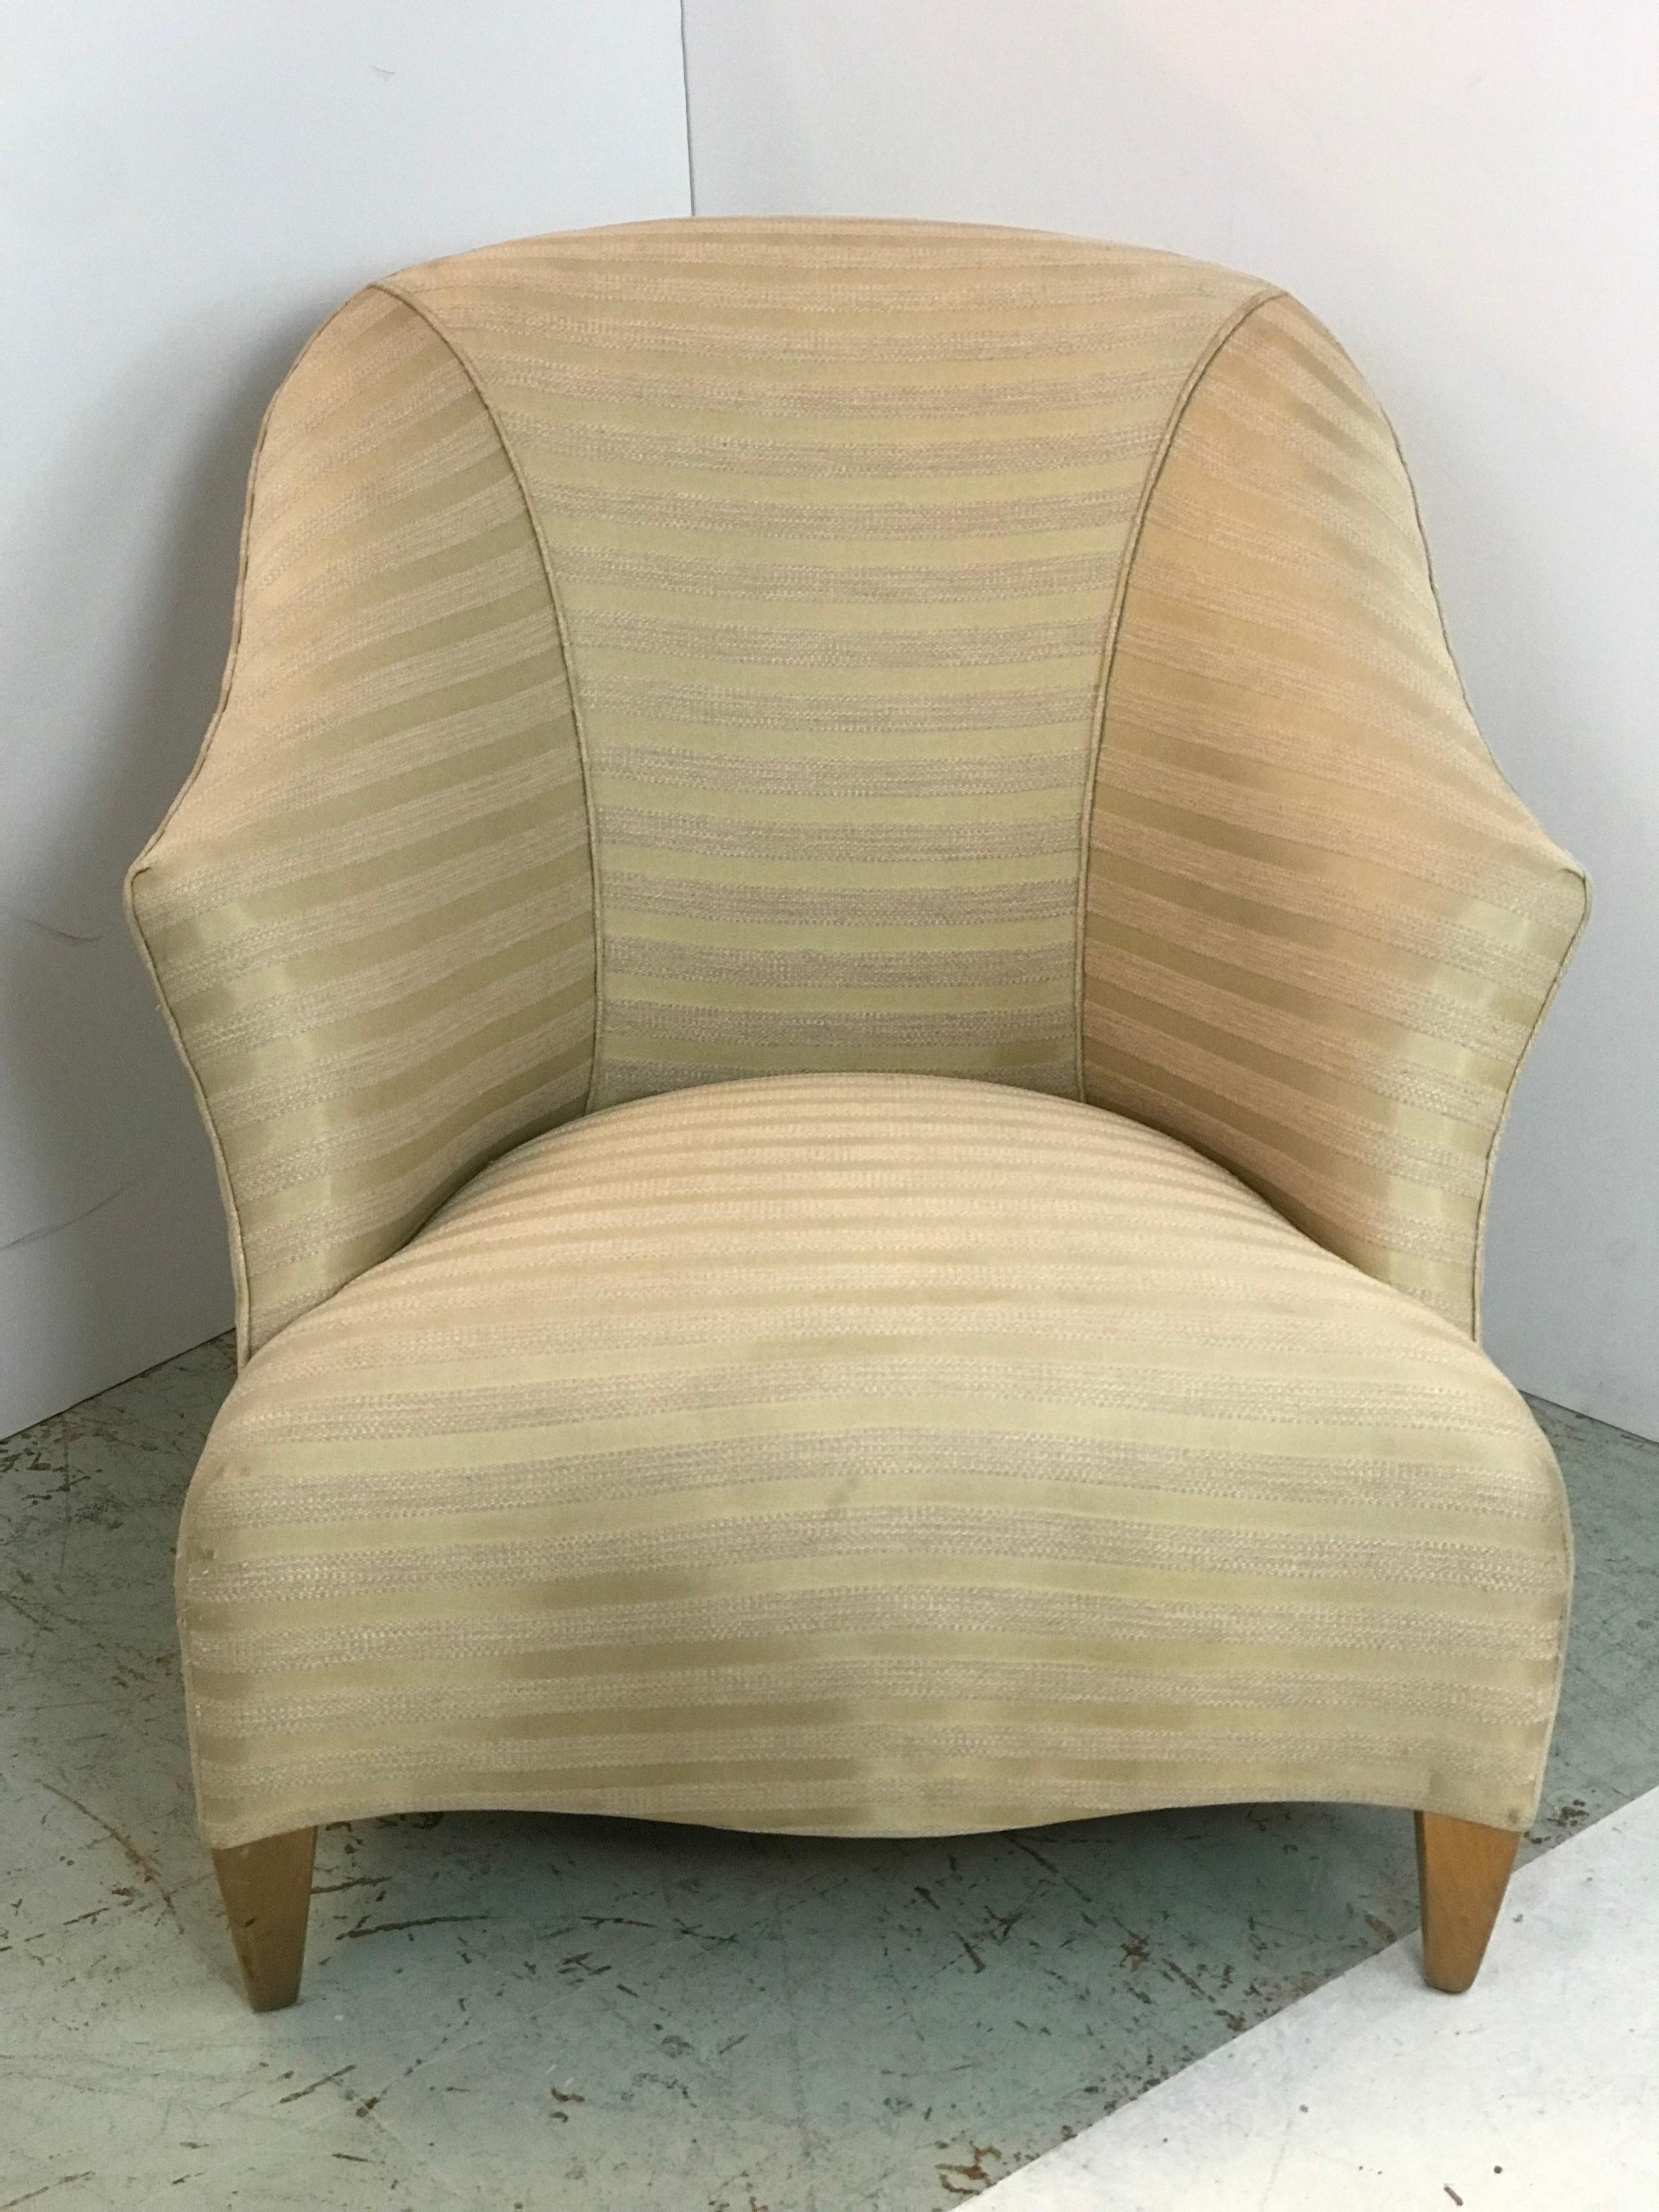 Neoclassical John Hutton Designs for Donghia Ghost/Spirit Club Chair in of the Period Fabric